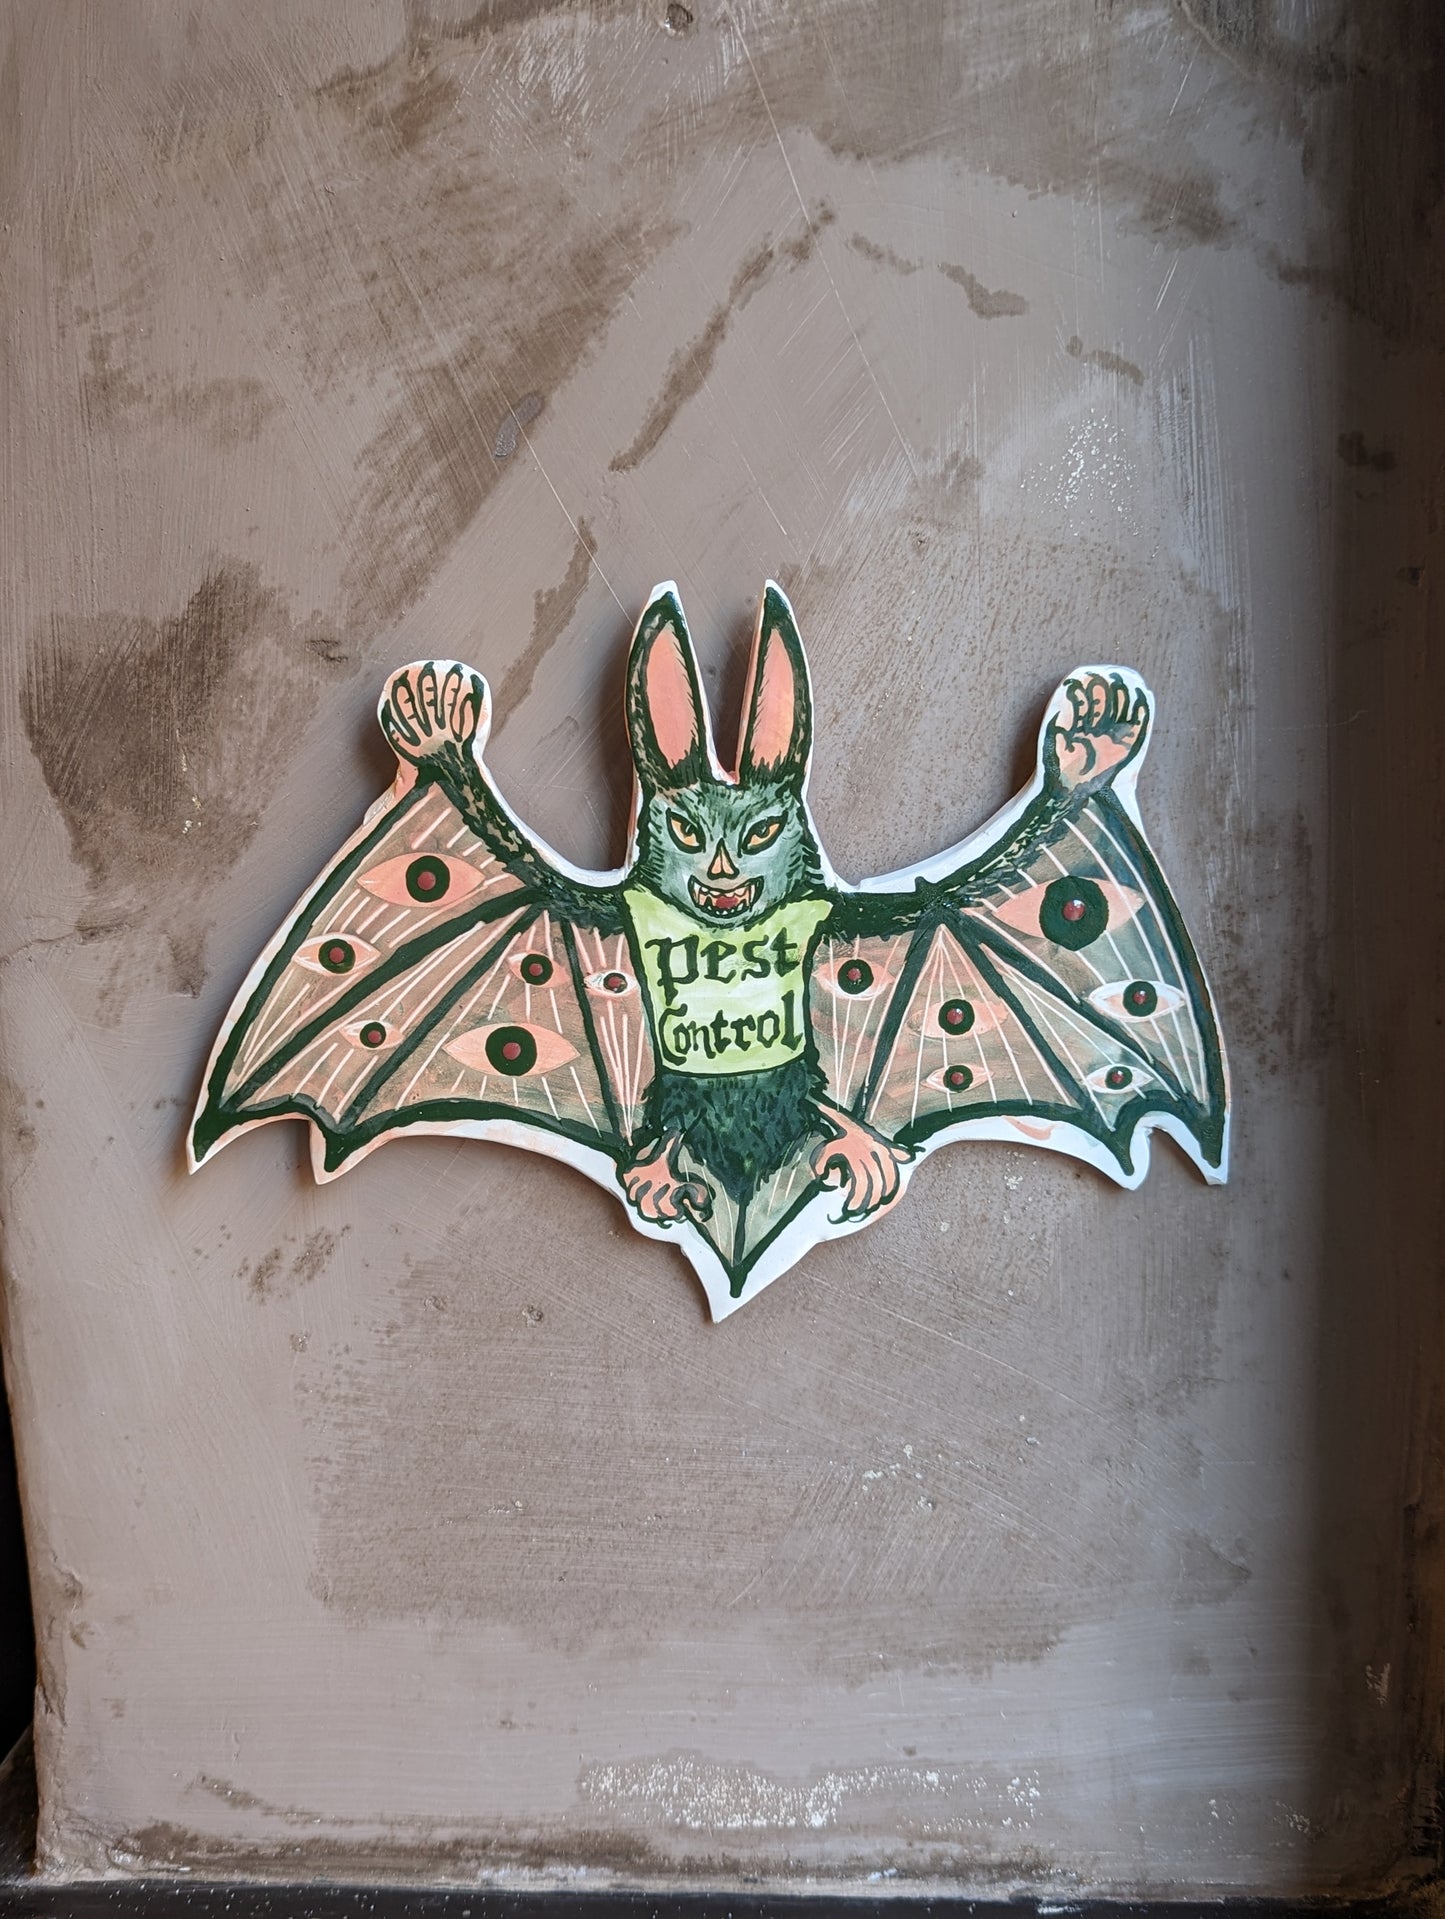 "Pest Control" Wall Plaque by Ciara Veronica Dunne